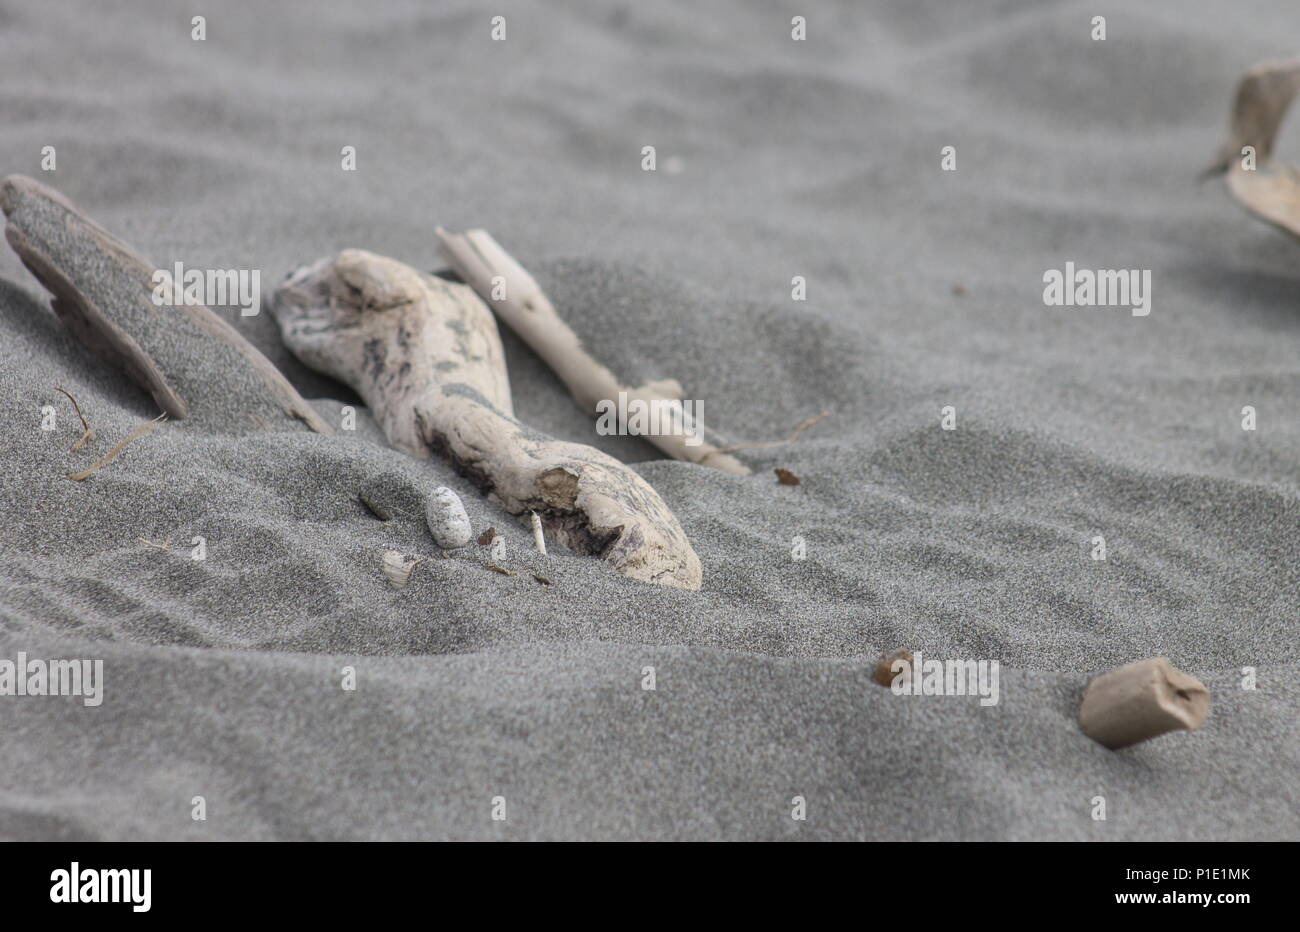 close up image of driftwood on soft sand with a shoe impression over top. Stock Photo